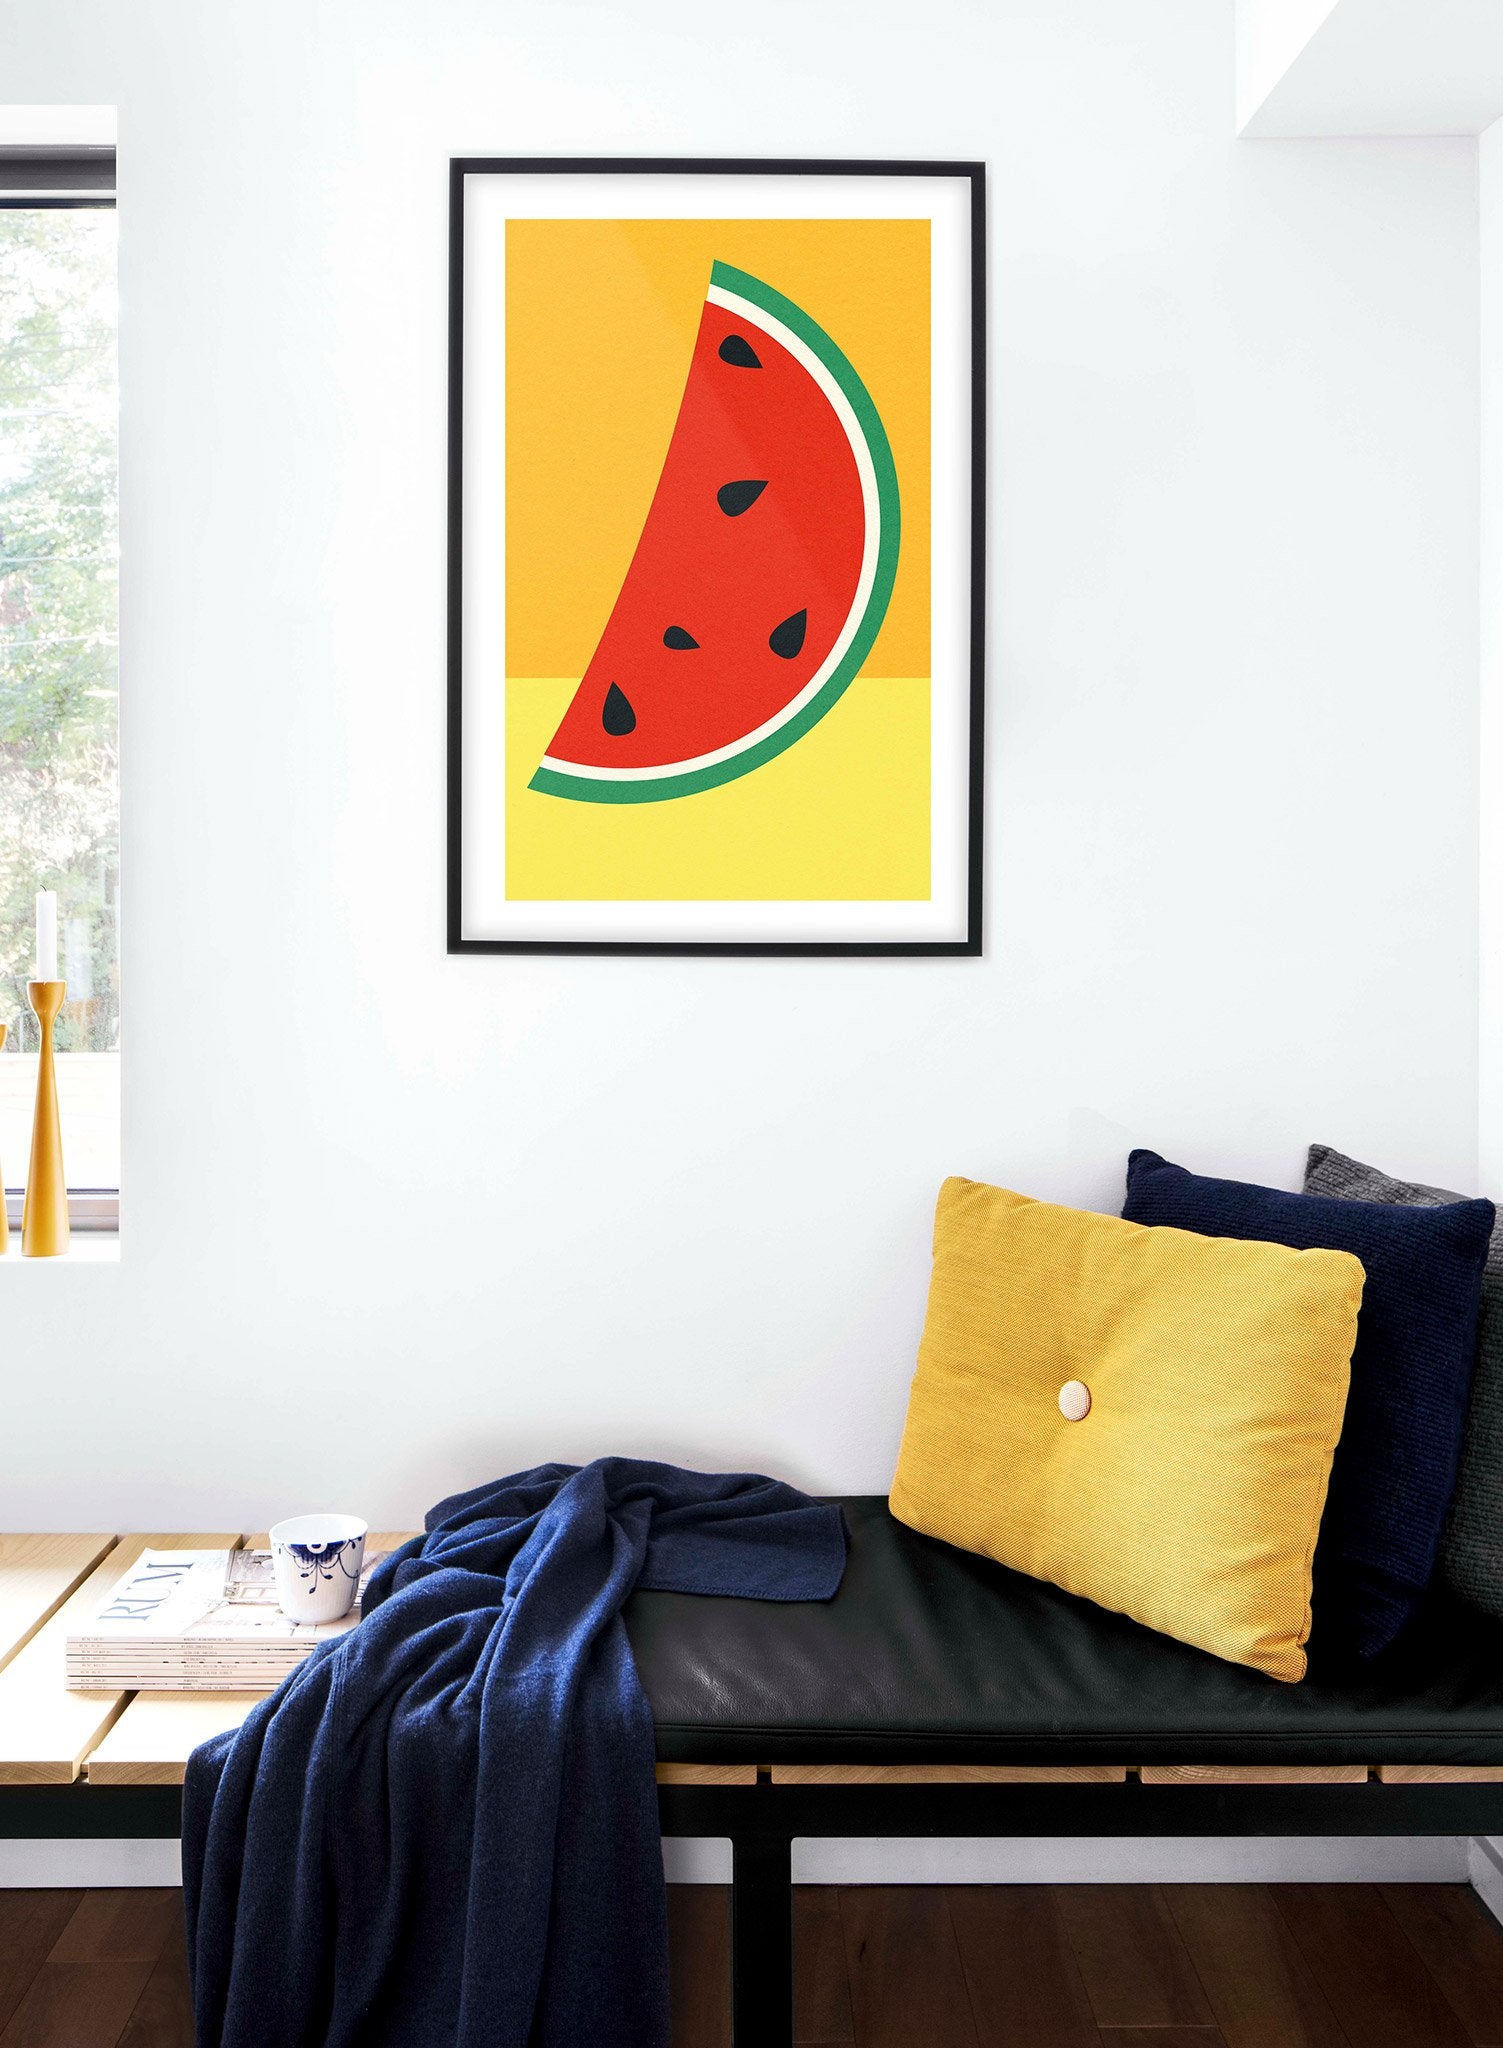 Minimalist pop art paper illustration by German artist Rosi Feist with group of watermelon slice - Lifestyle - Bedroom